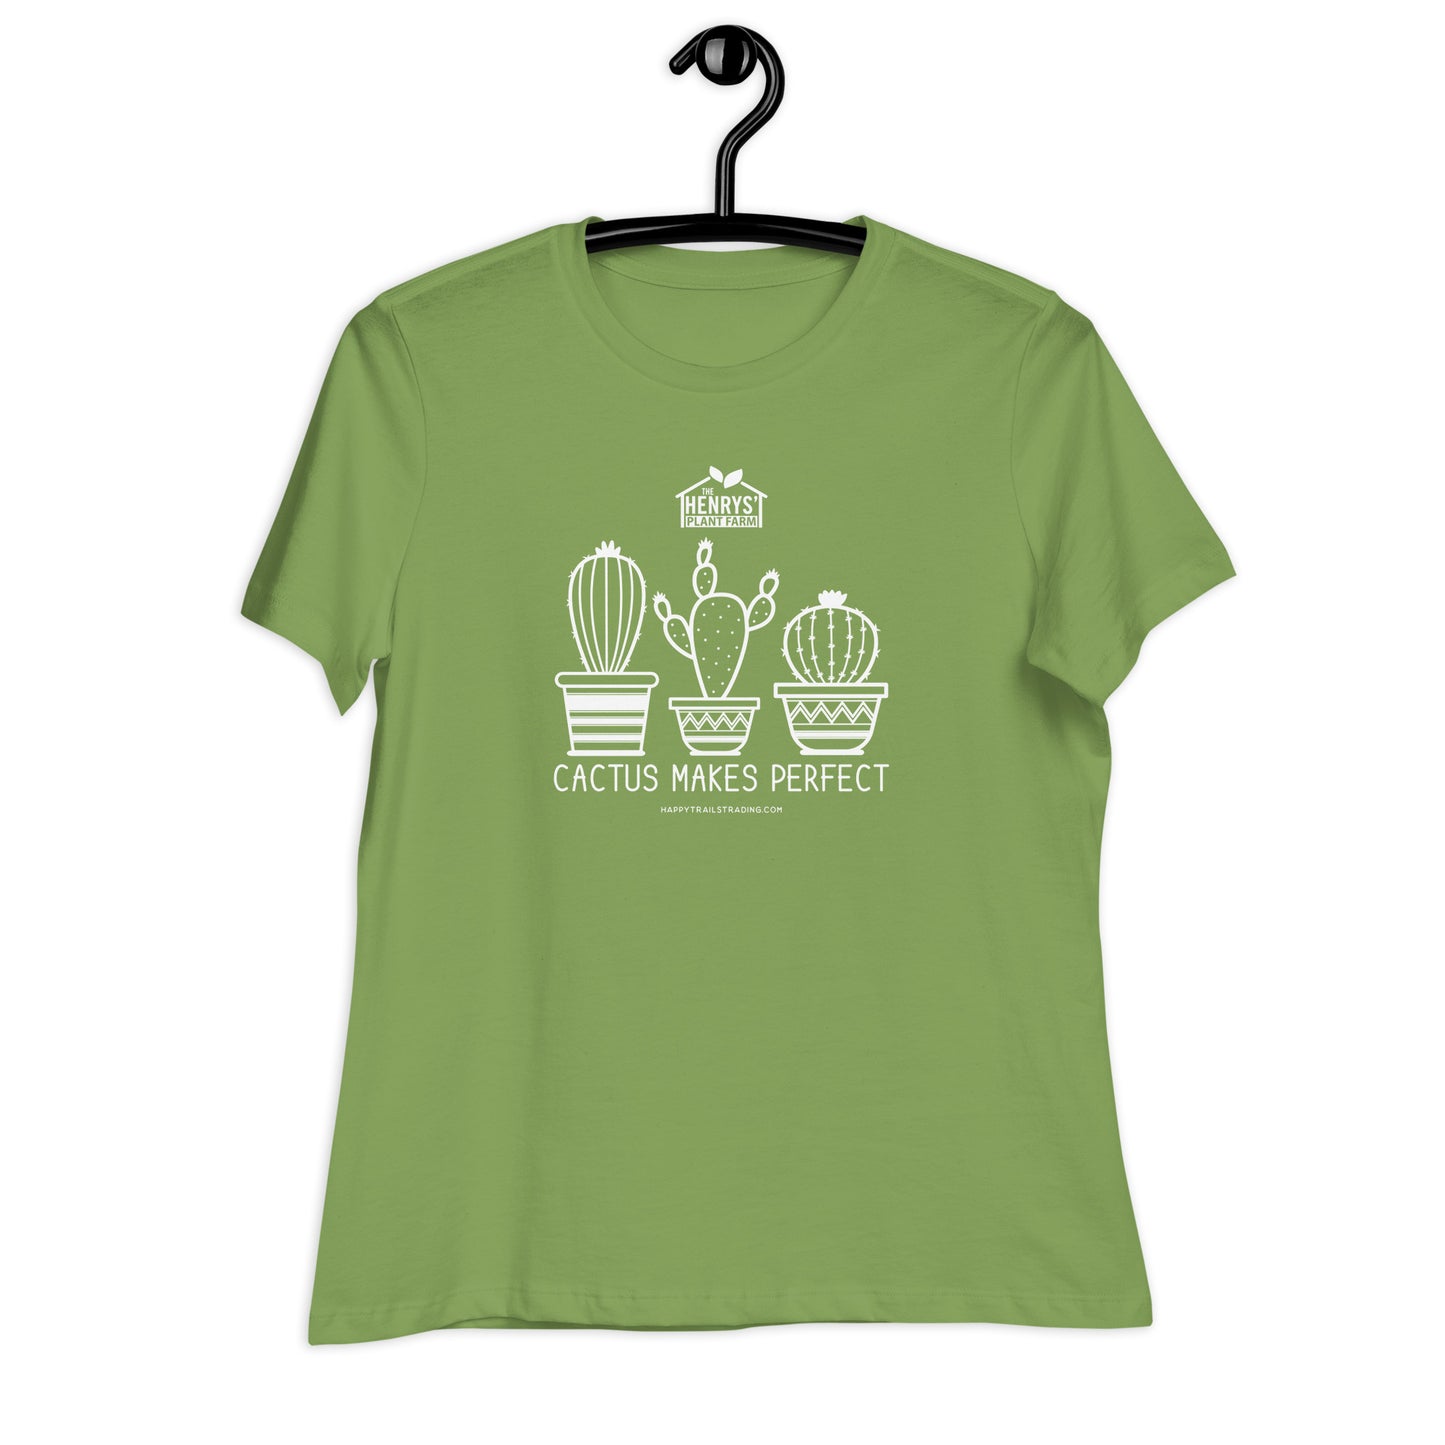 Cactus Makes Perfect - Women's Relaxed T-Shirt